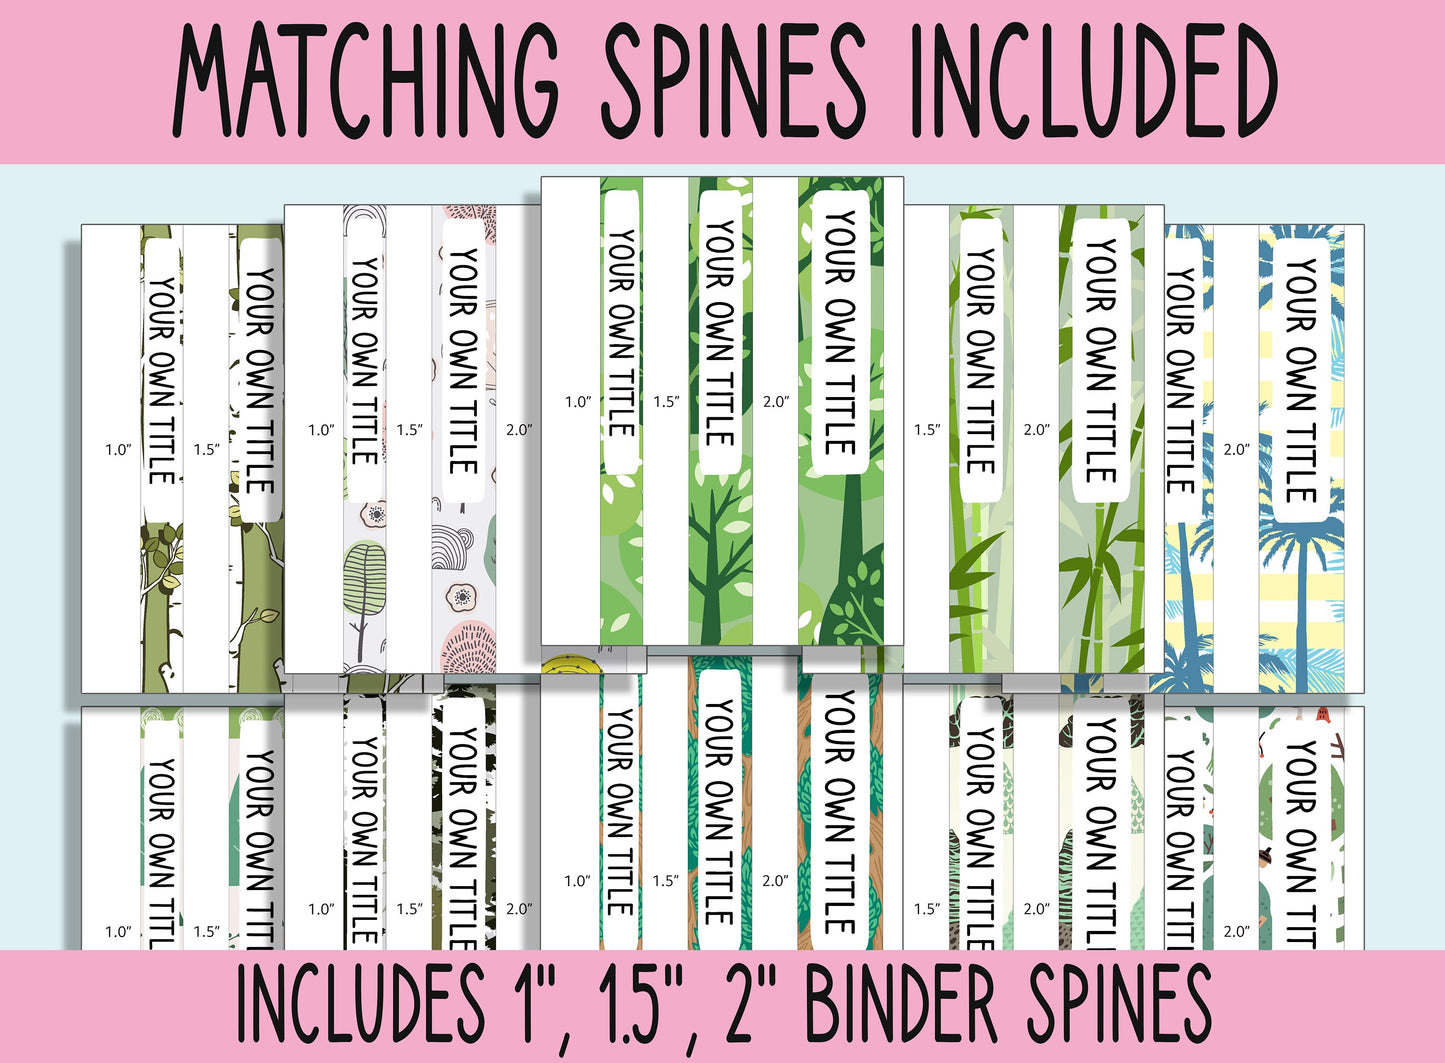 10 Editable Tree Binder Covers, Includes 1, 1.5, 2" Spines, Available in A4 & US Letter, Editing with PowerPoint or PDF Reader